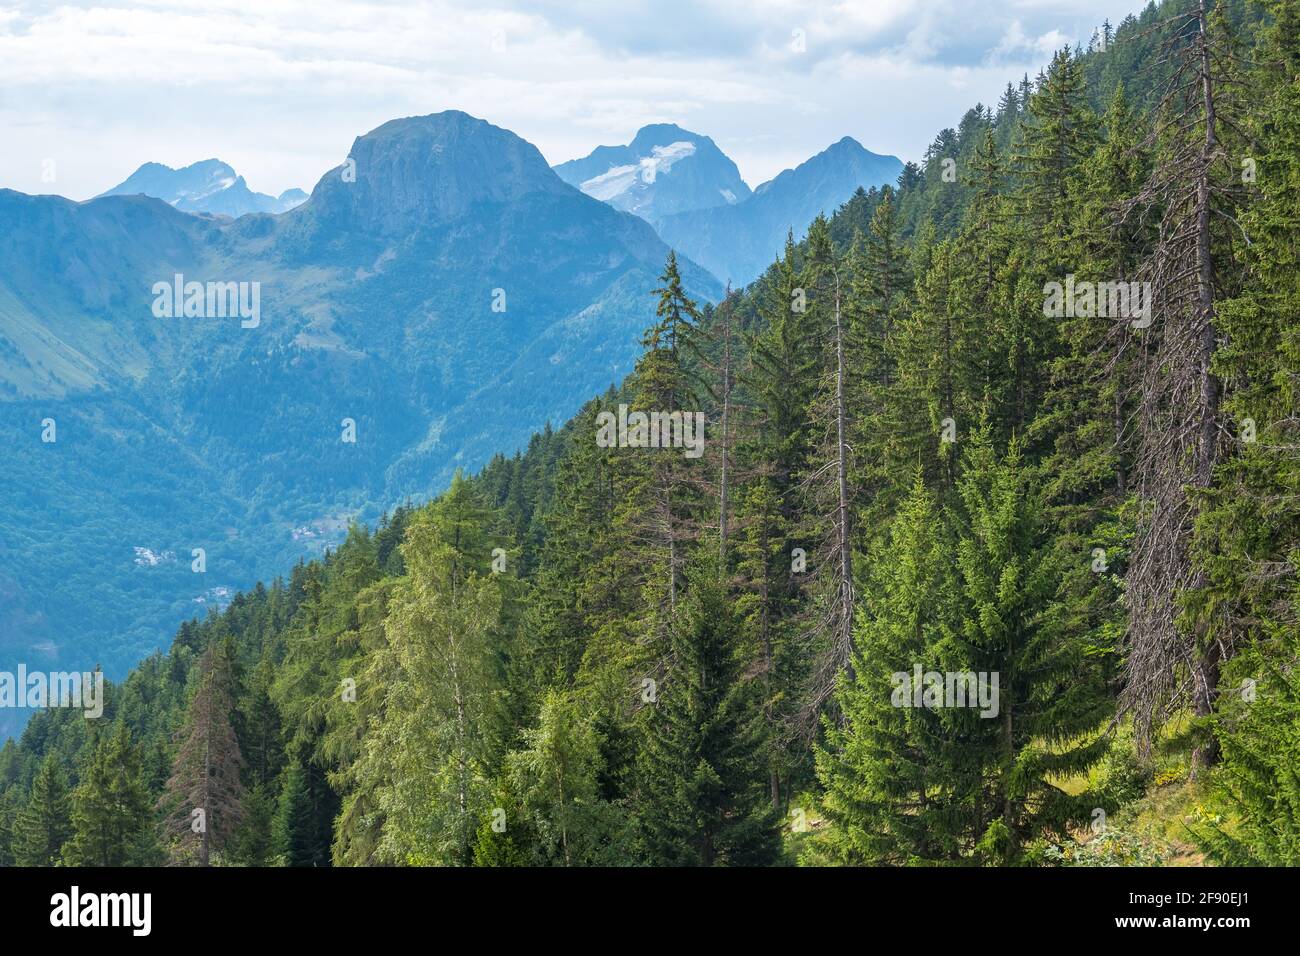 Auris, Isere, France - August 22, 2019: Auris en Oisans resort in Northern Alps in summer. The resort is bordered by the highest spruce forest in Euro Stock Photo